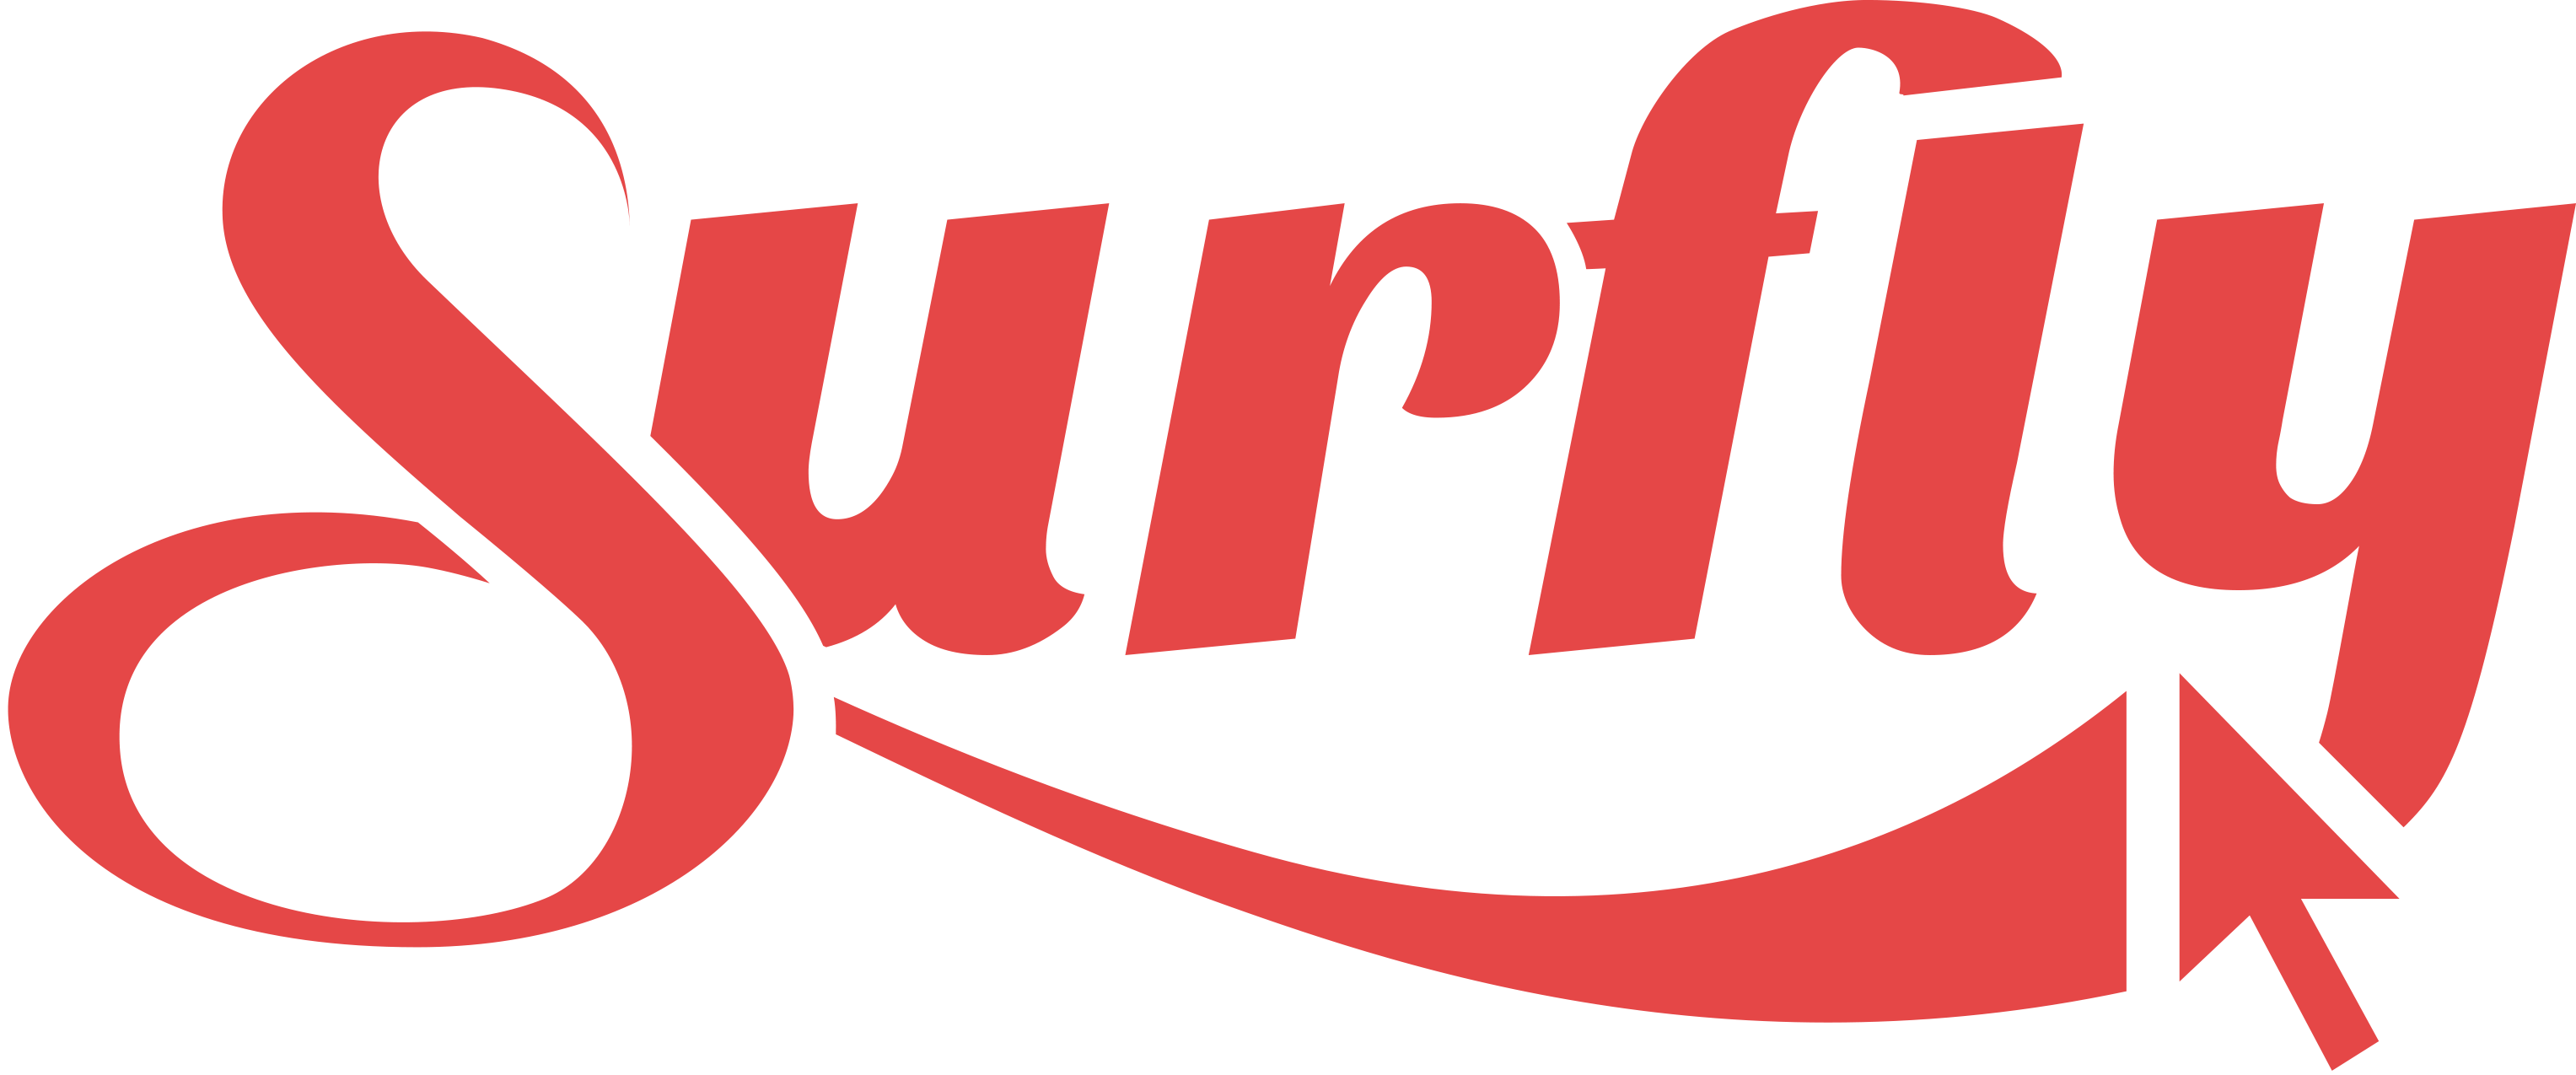 Surfly Logo png